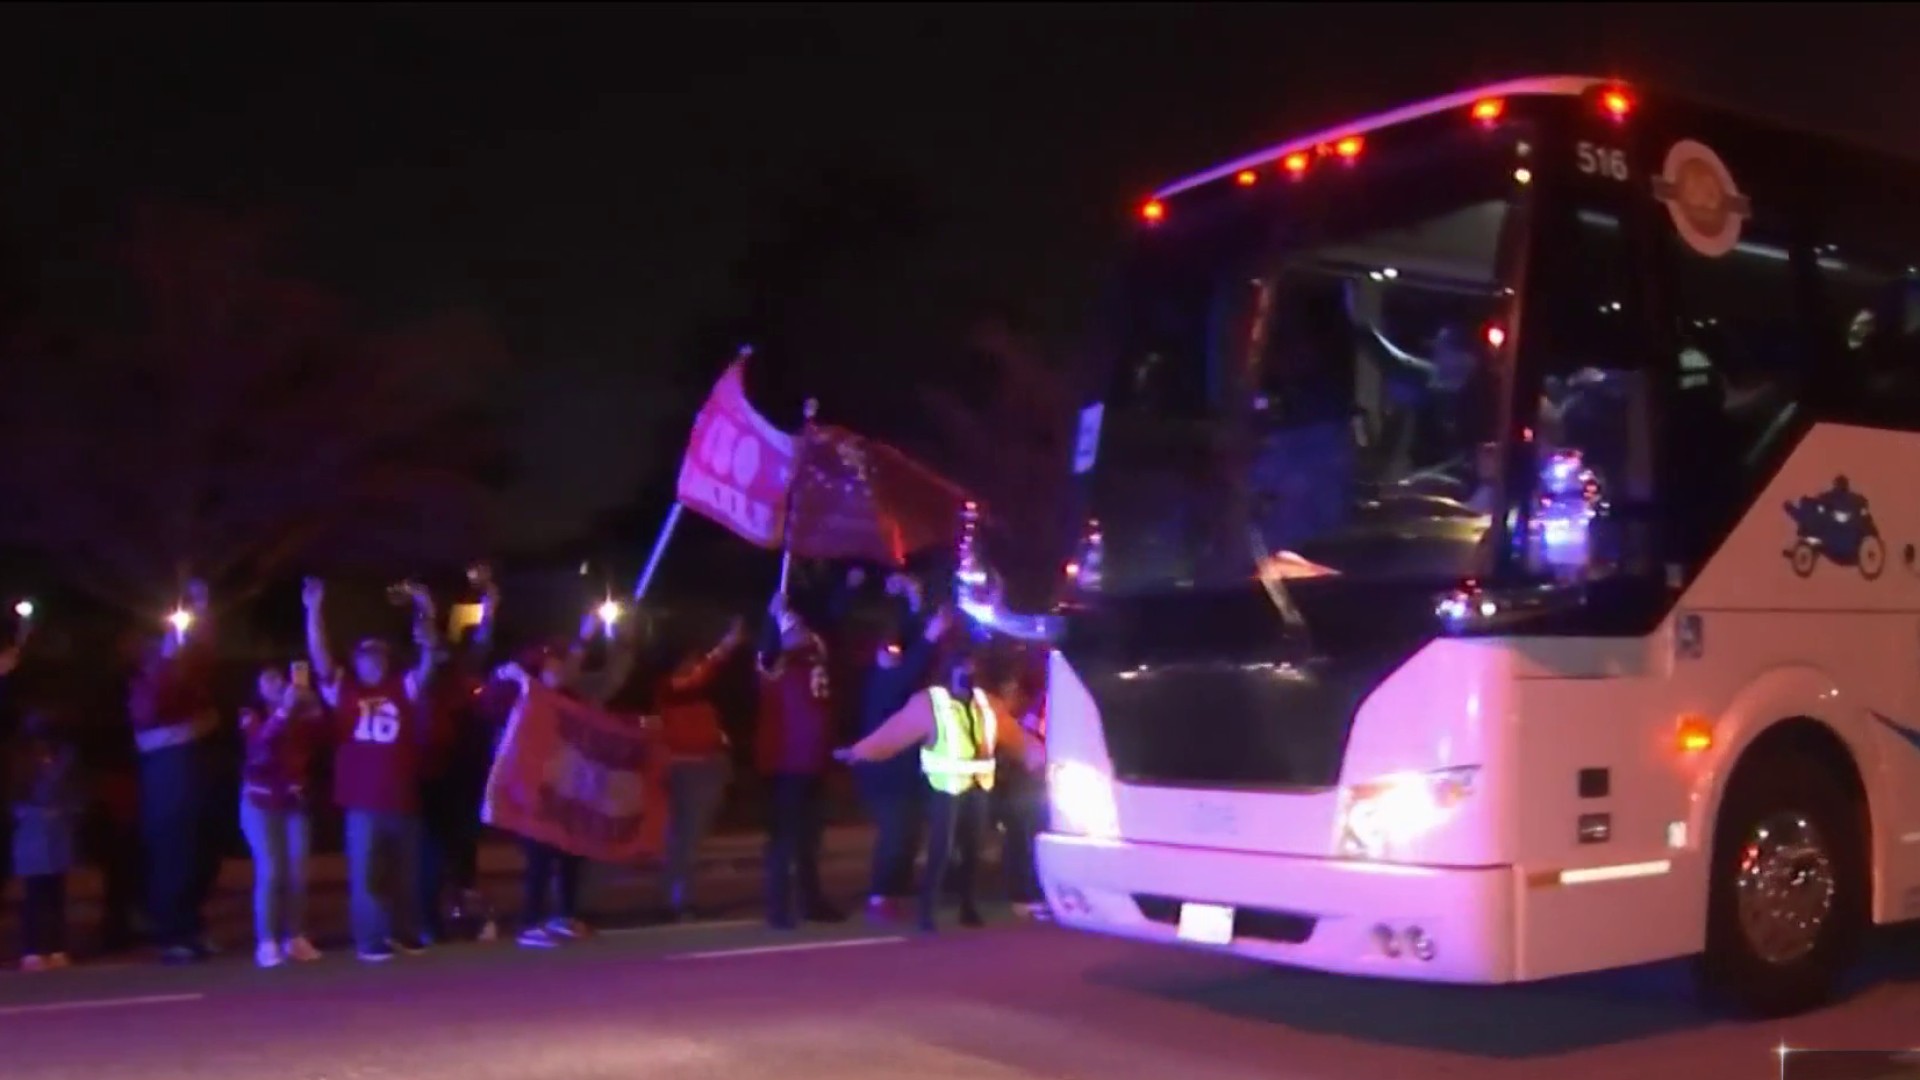 49ers Fans Arrive in LA Ahead of NFC Title Game Against Rams 